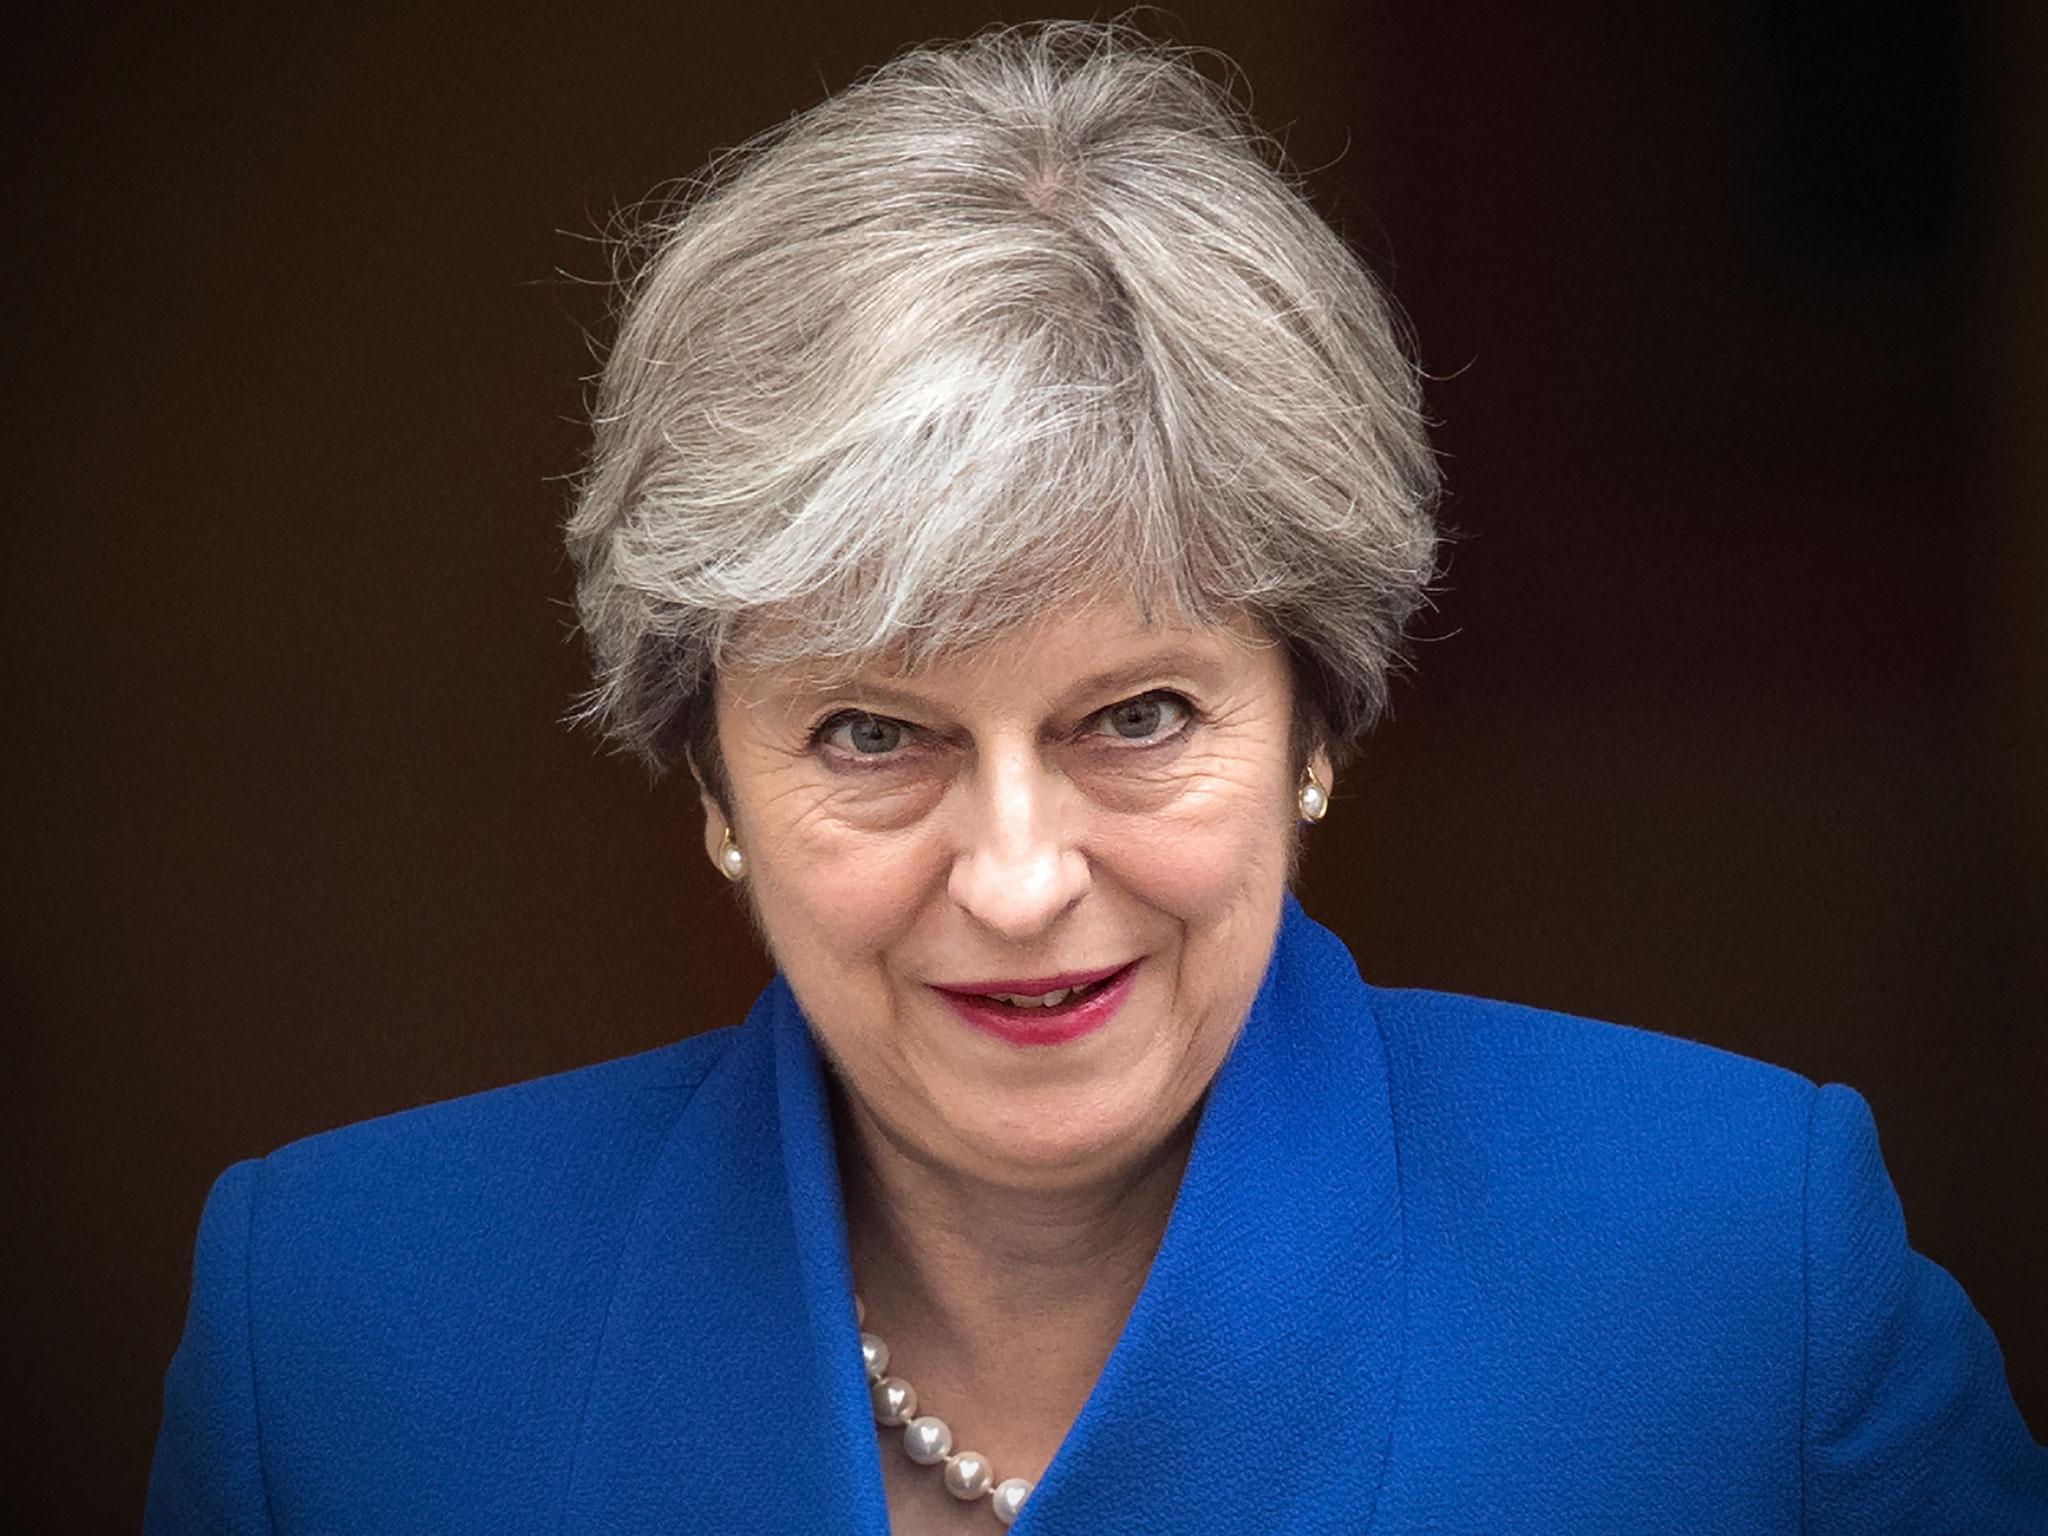 Just 34 per cent of adults said they were satisfied with Theresa May, while 59 per cent said they were dissatisfied